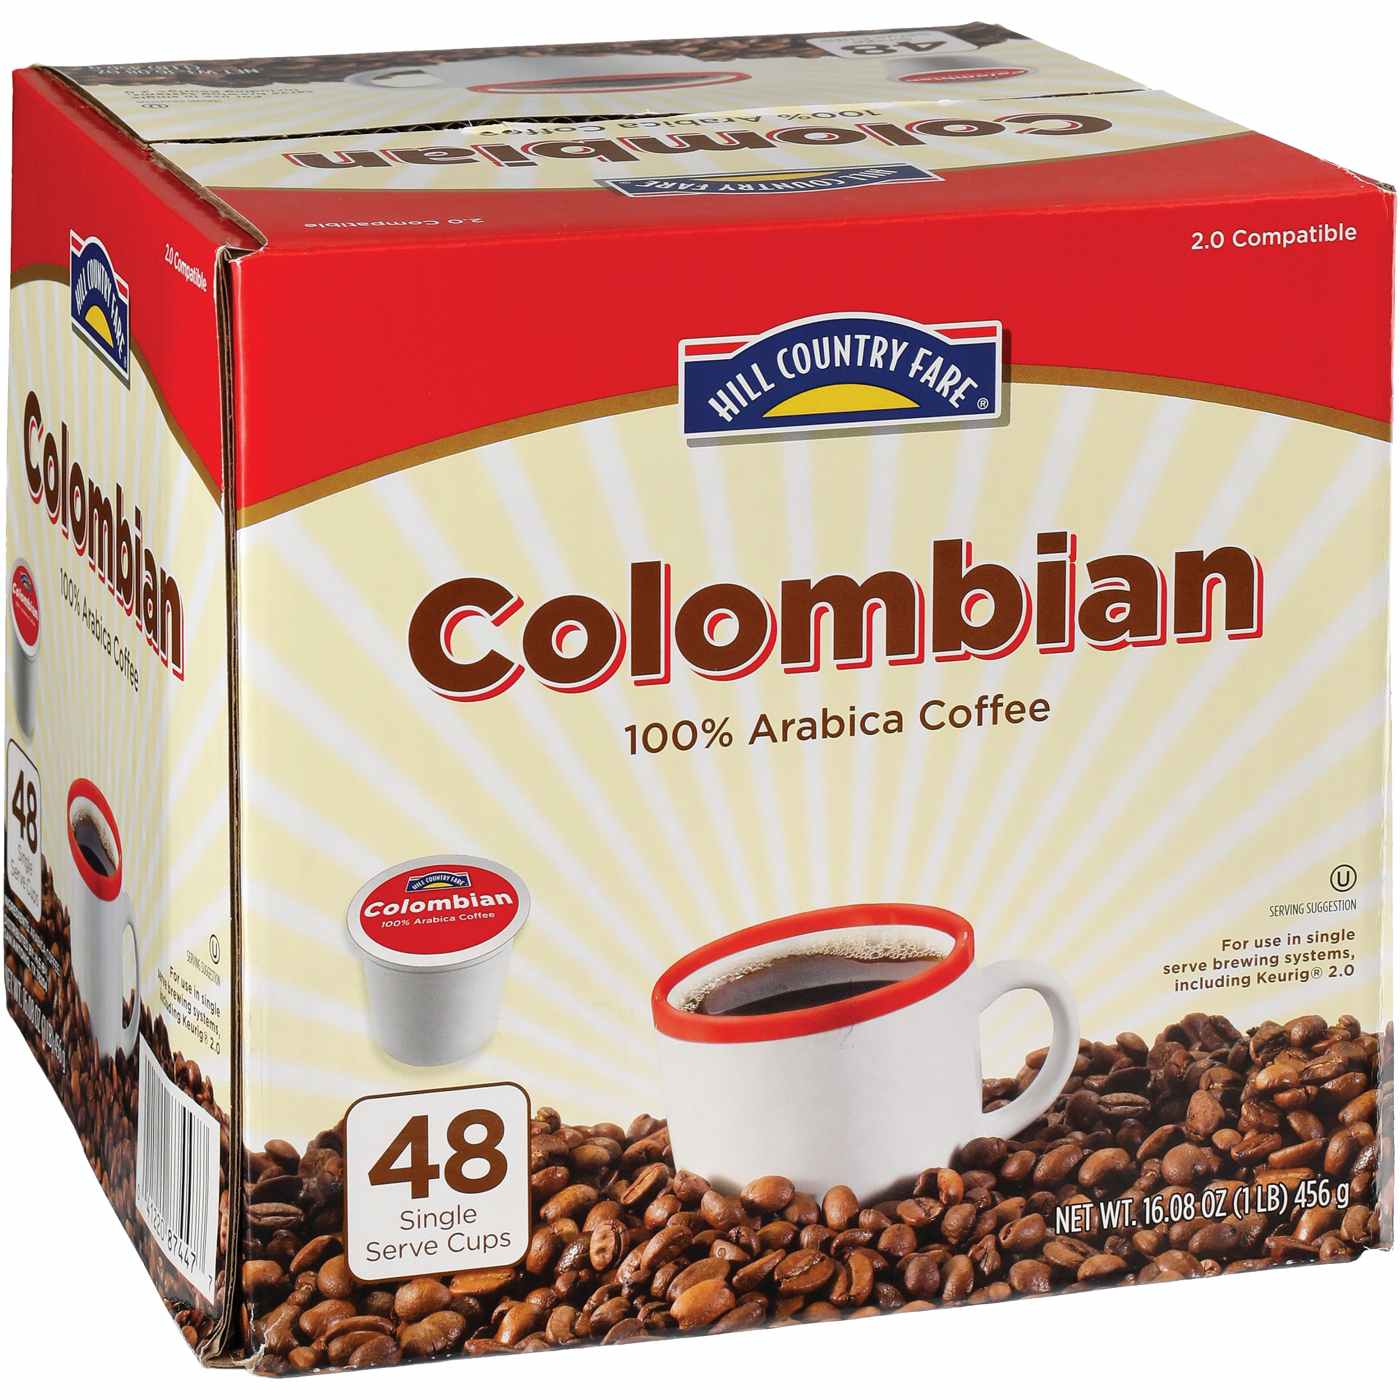 Hill Country Fare Colombian Single Serve Coffee Cups; image 1 of 2